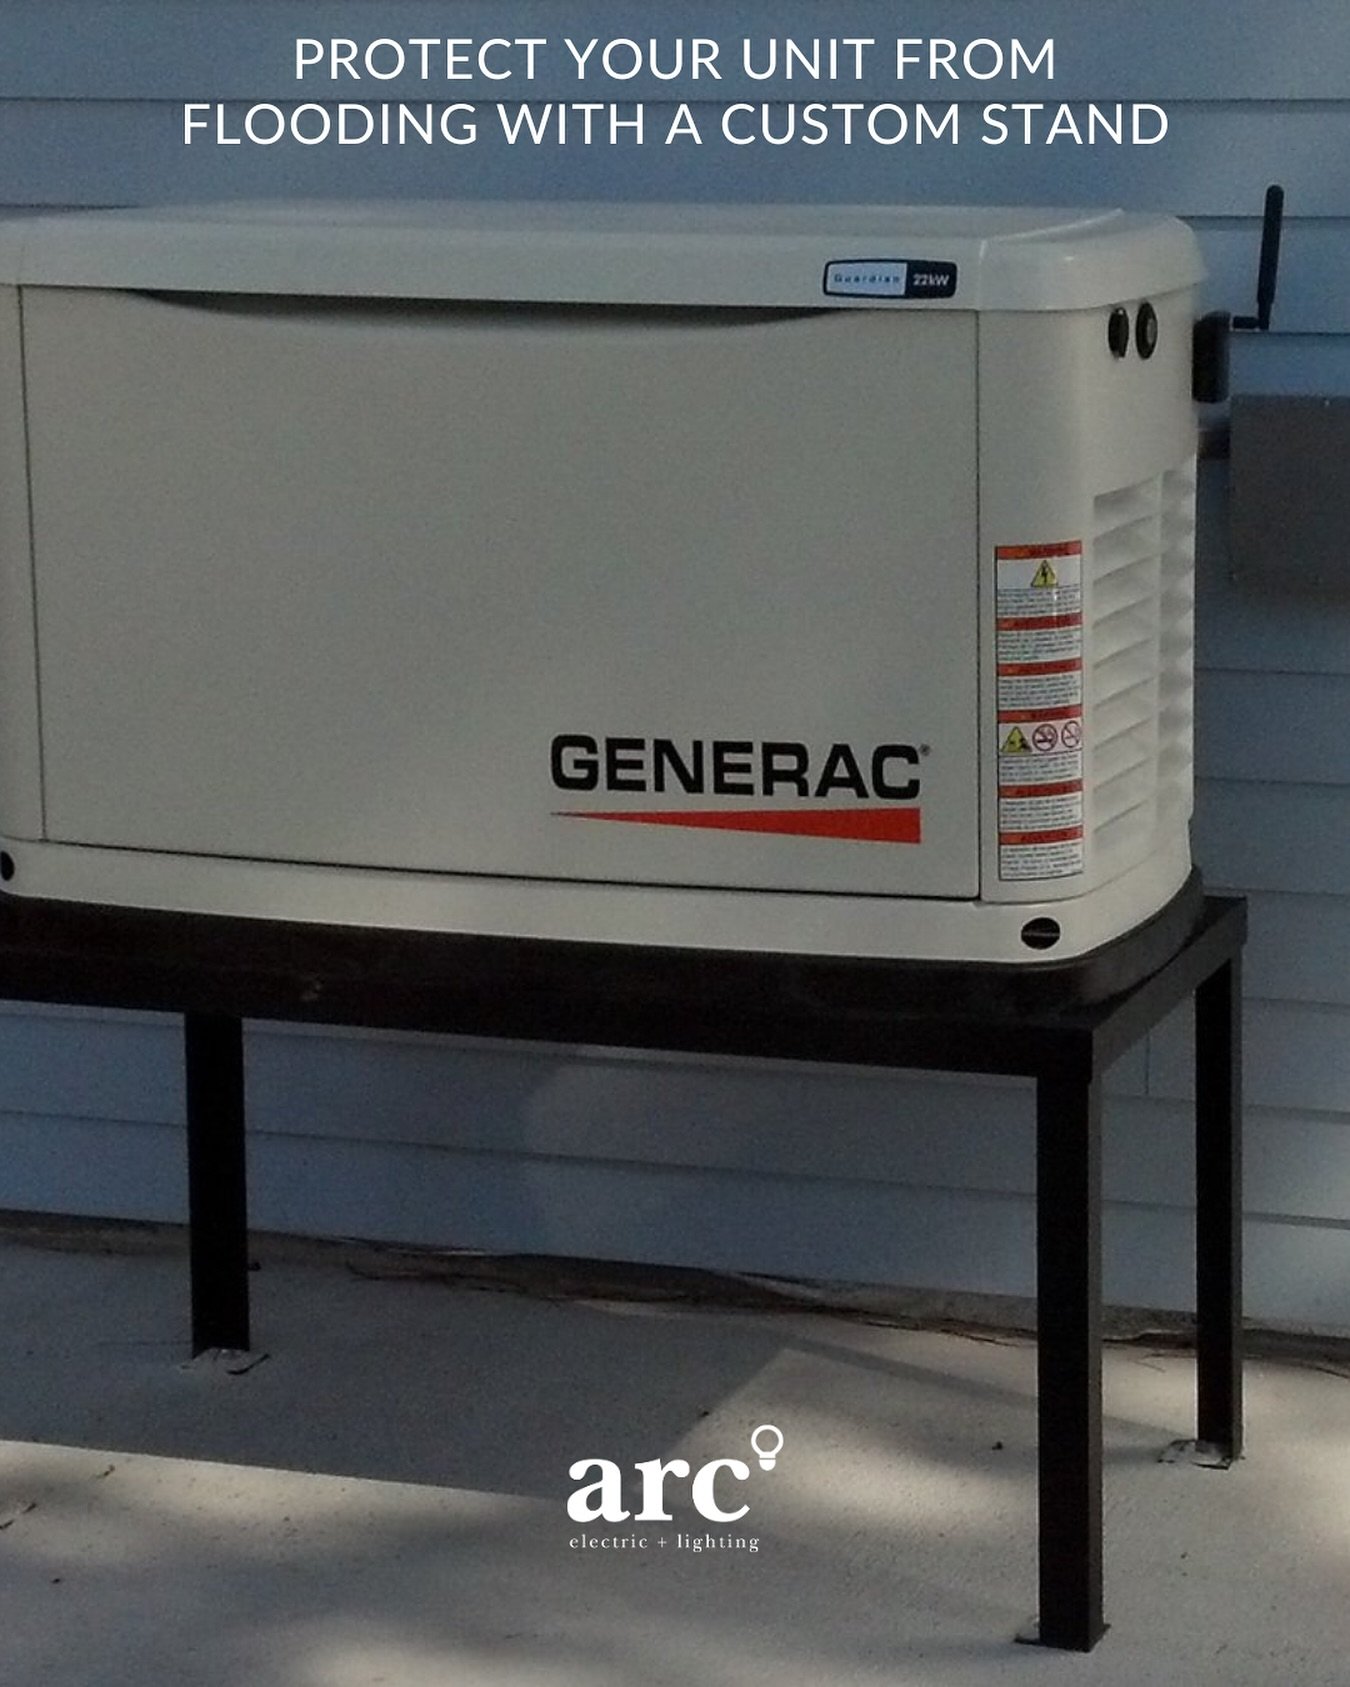 flooding in your area? no problem.  arc electric + lighting offers standard and custom stands up to 6 feet for your standby generator. we recognize this is a large investment and we want to do what we can to help you protect it. 💪🏼 arcnotark.com
.
